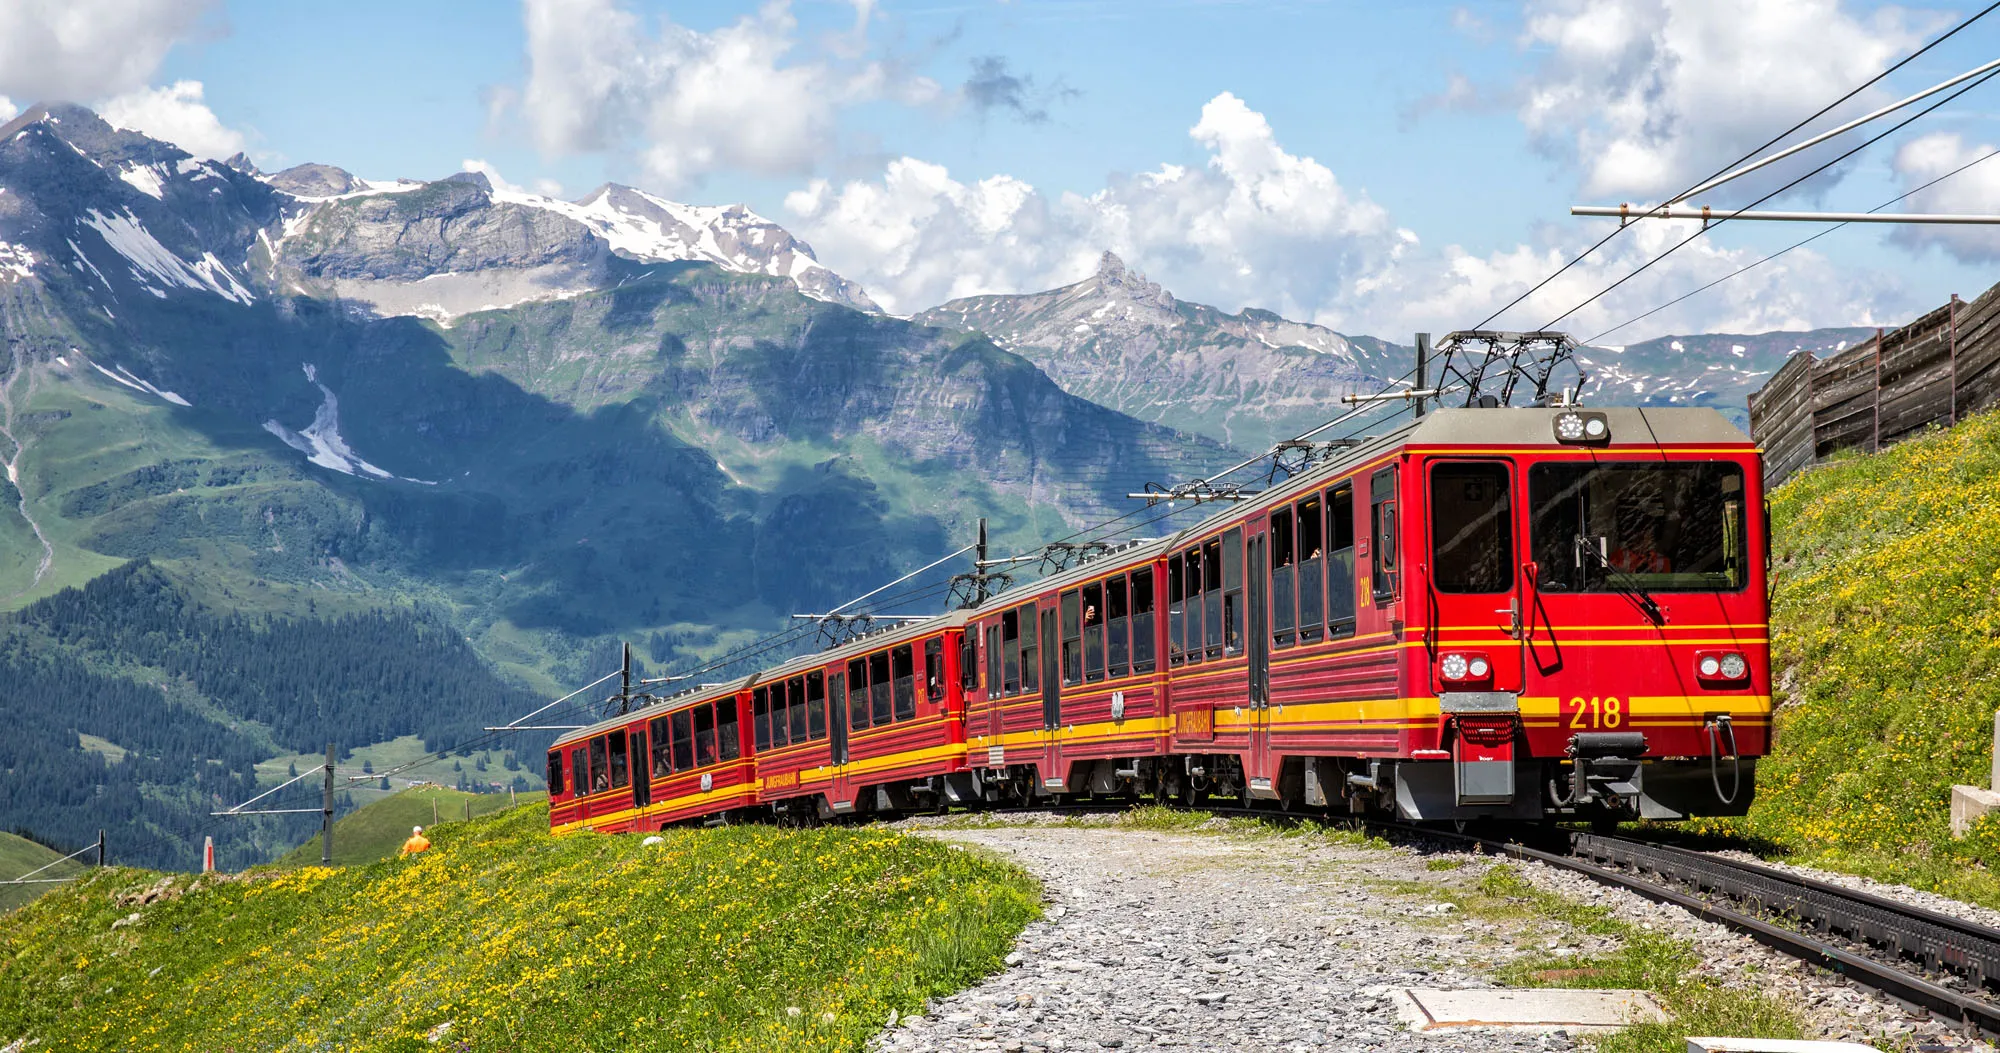 Featured image for “Bernese Oberland Travel Guide: Focus on the Jungfrau Region”